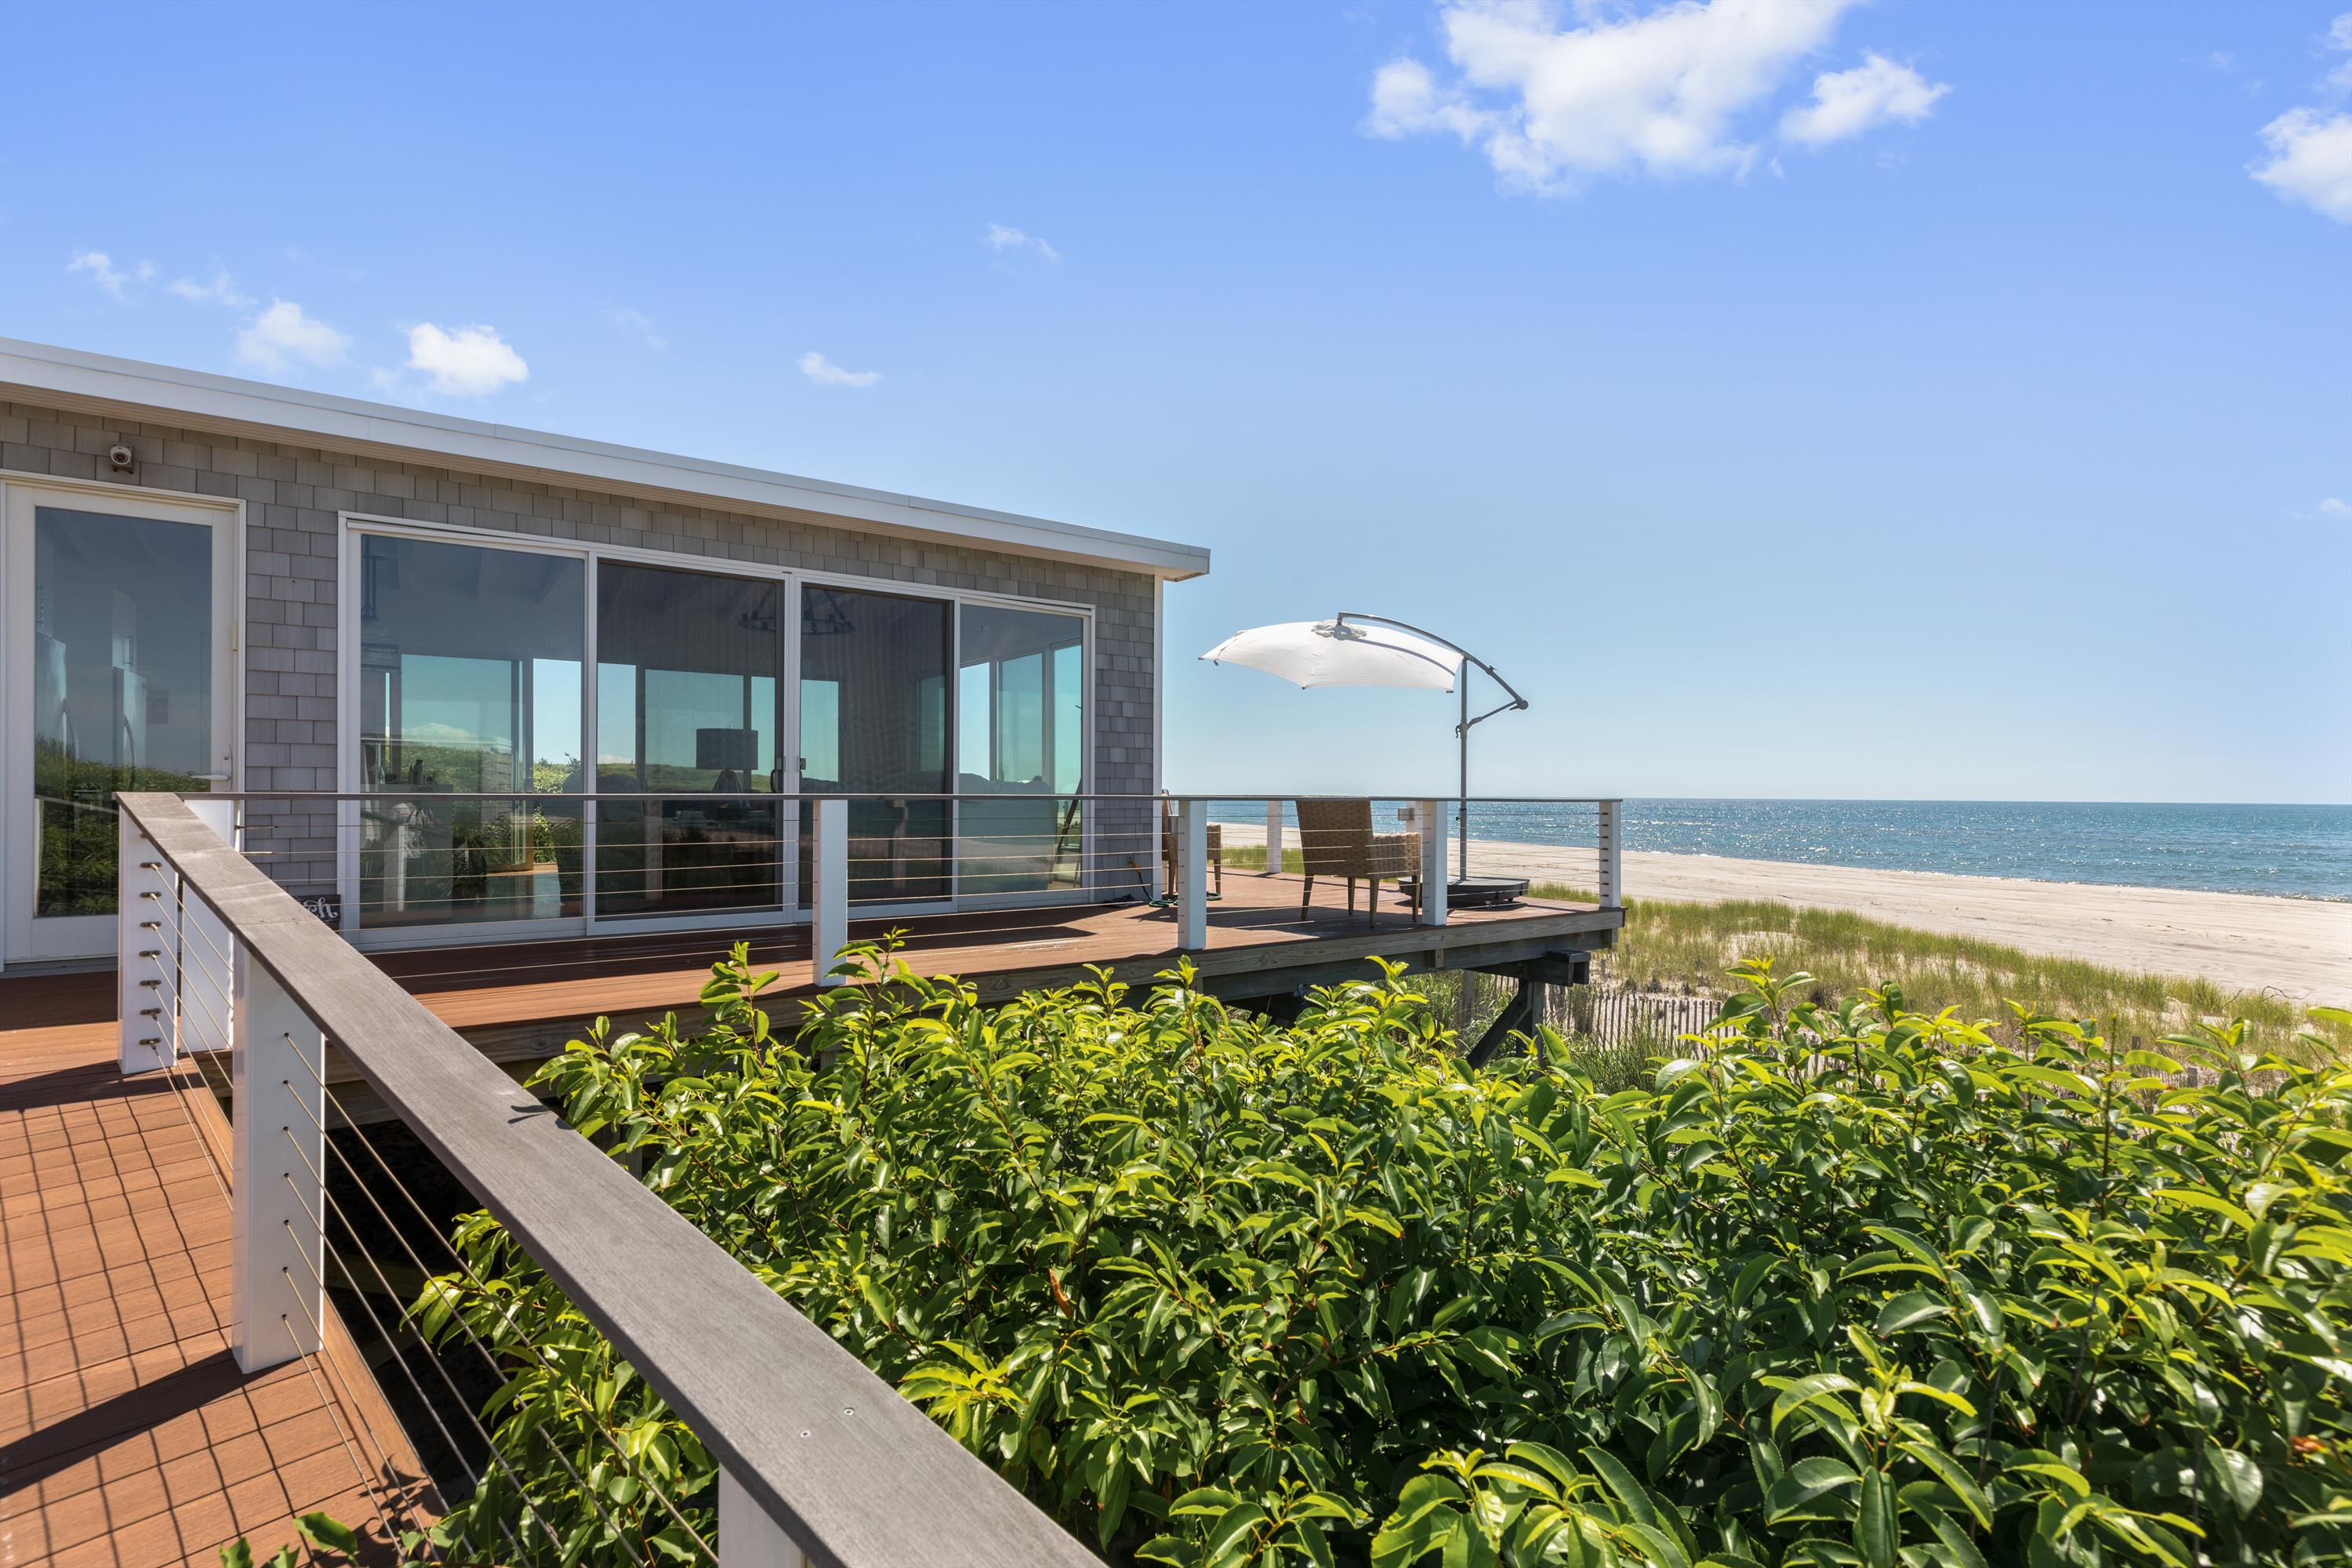 Impeccably renovated from top to bottom, this beachfront residence boasts panoramic Atlantic Ocean views, 3 bedrooms, 2 bathrooms, and a spacious wraparound deck. Located on the eastern end of Fire Island, in an exclusive enclave of Water Island, this one of a kind home offers the utmost privacy, peace, and quiet in a truly spectacular setting.  If you're seeking a quiet place to relax, look no further.  With lush vegetation and National Seashore Preserve lands to the east and west, you will enjoy the majestic views and natural setting at this special property. The open great room features 3 walls of glass through which to take in the mesmerizing views, a brand new high-end kitchen, vaulted ceilings, and designer furnishings.  The luxurious ocean view primary bedroom features a beautifully appointed en-suite bathroom, high ceilings, ample closet space, and direct access to the deck. Enjoy the stunning, never crowded beach directly in front of the home, or walk a short stretch down the sand to the lifeguarded area of Barrett Beach.  Also included is private boat transfers from the mainland to the house via the private dock shared by the 4 homes in the community.  This incredible retreat is less than 60 miles from Manhattan, 1 mile from the Fire Island Pines, 1.5 miles from Davis Park, and only a 15 minute boat ride across the Great South Bay from Sayville.<BR> <BR> 

